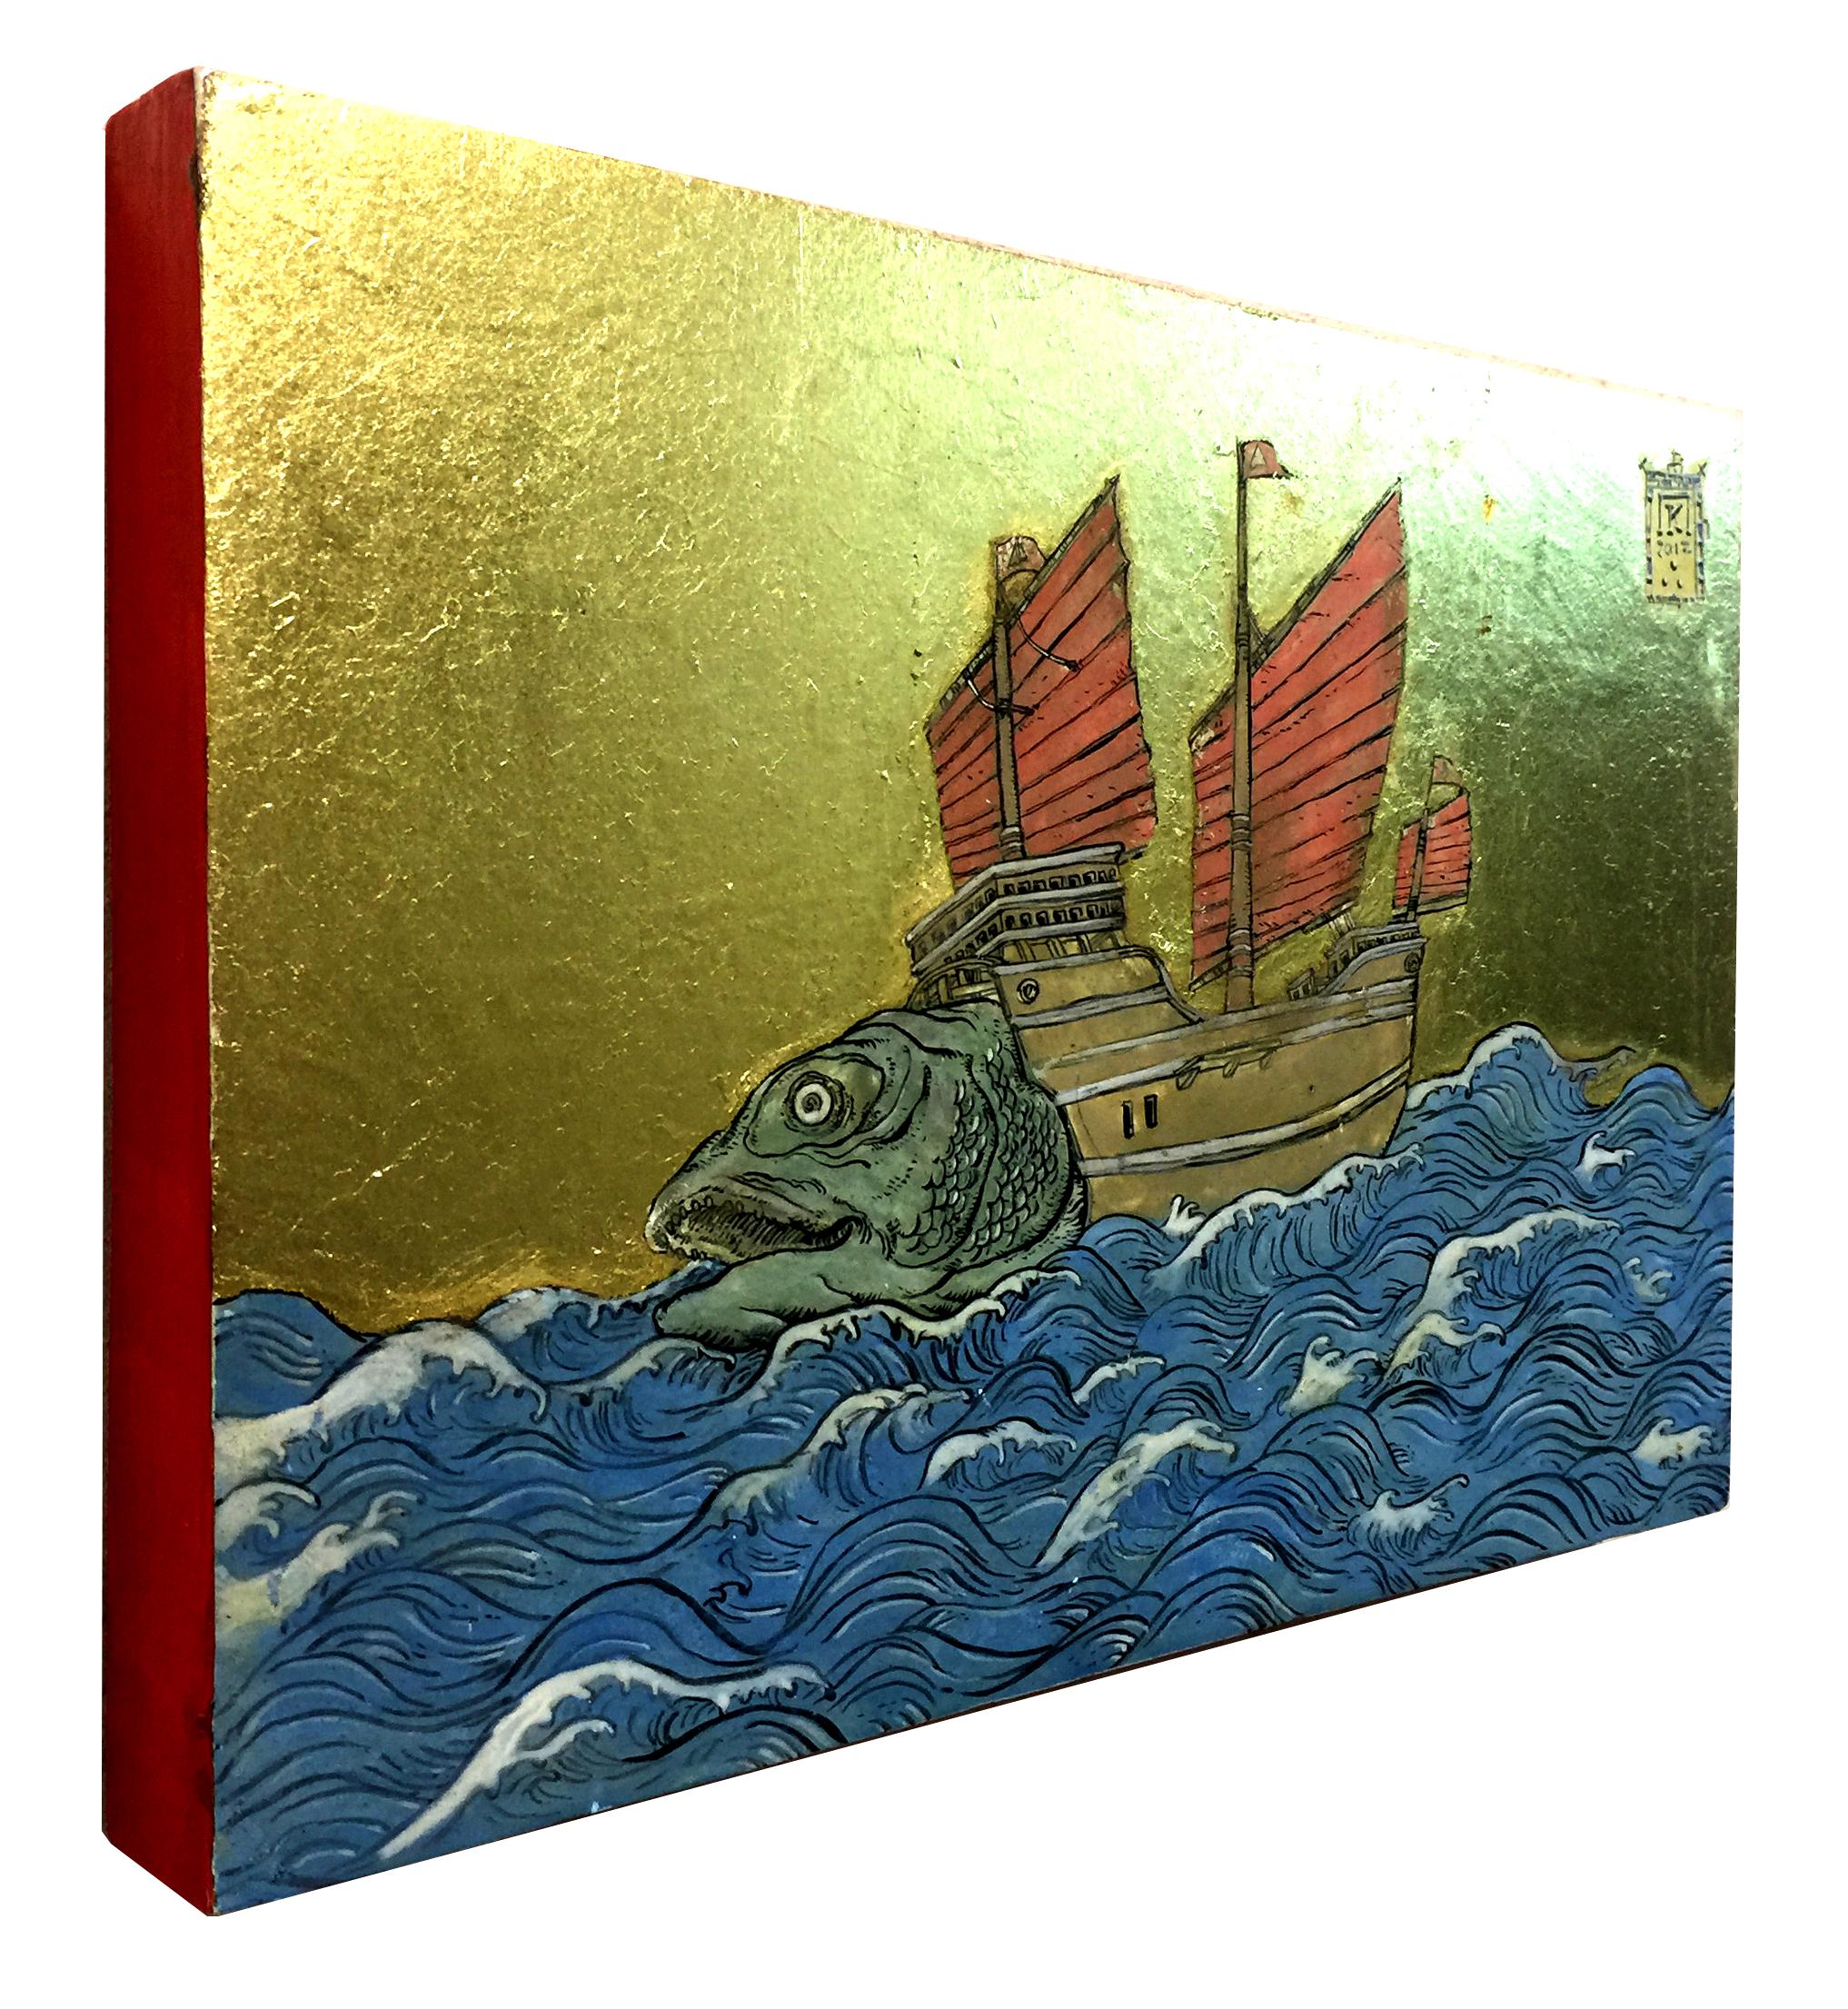 Study for a Boatfish with Red Sails - Ink, egg-tempera and gold leaf on panel - Painting by Konstantinos Papamichalopoulos